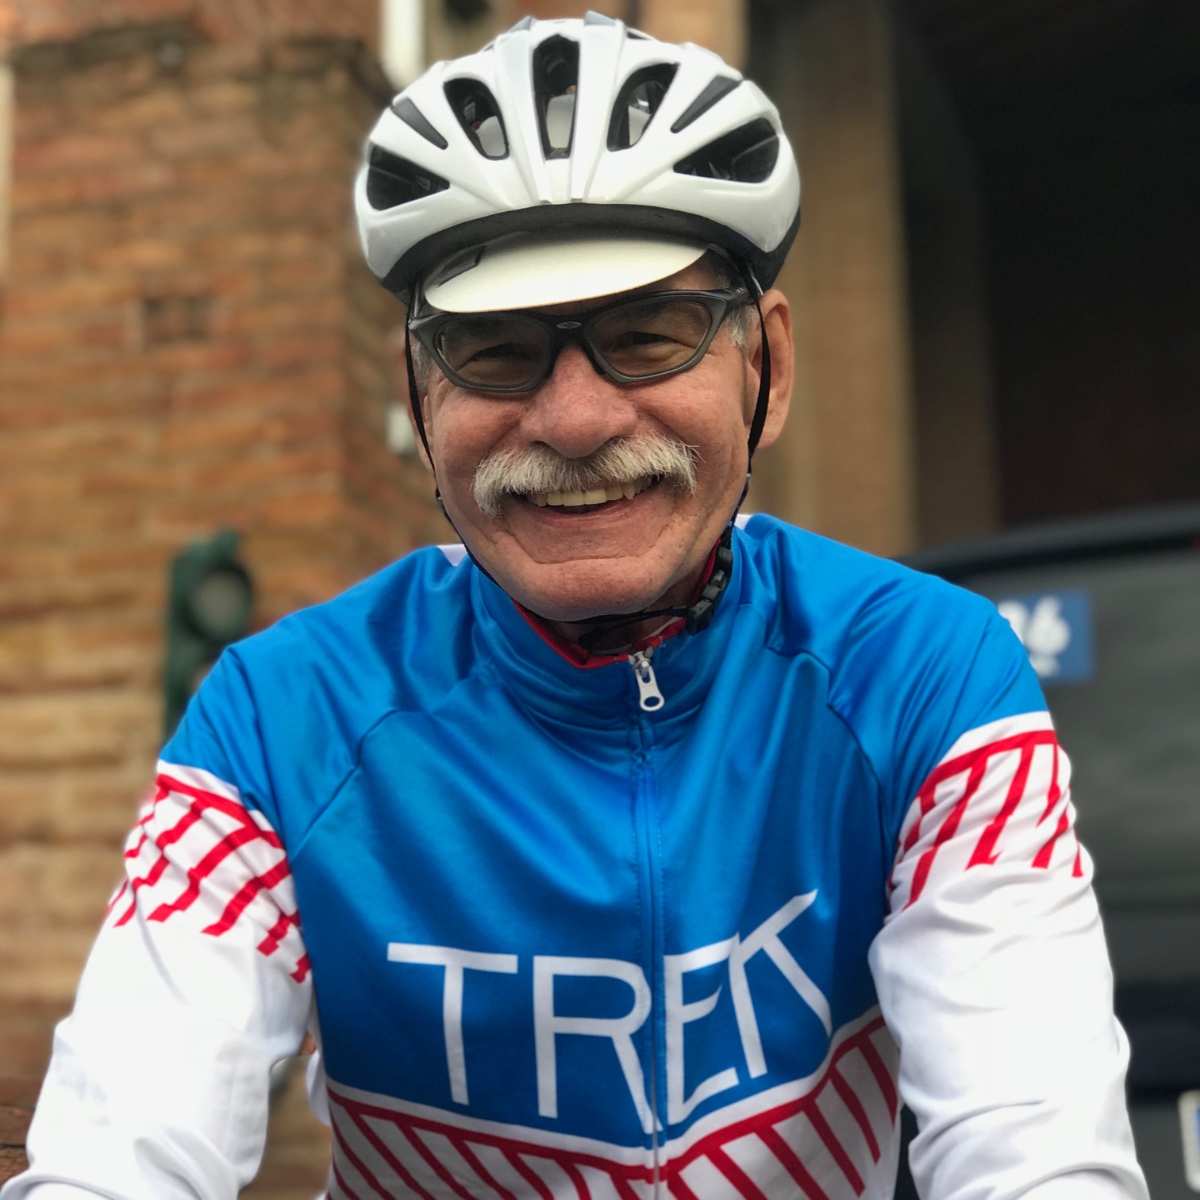 Close-up portrait of cyclist smiling, wearing Trek jersey.